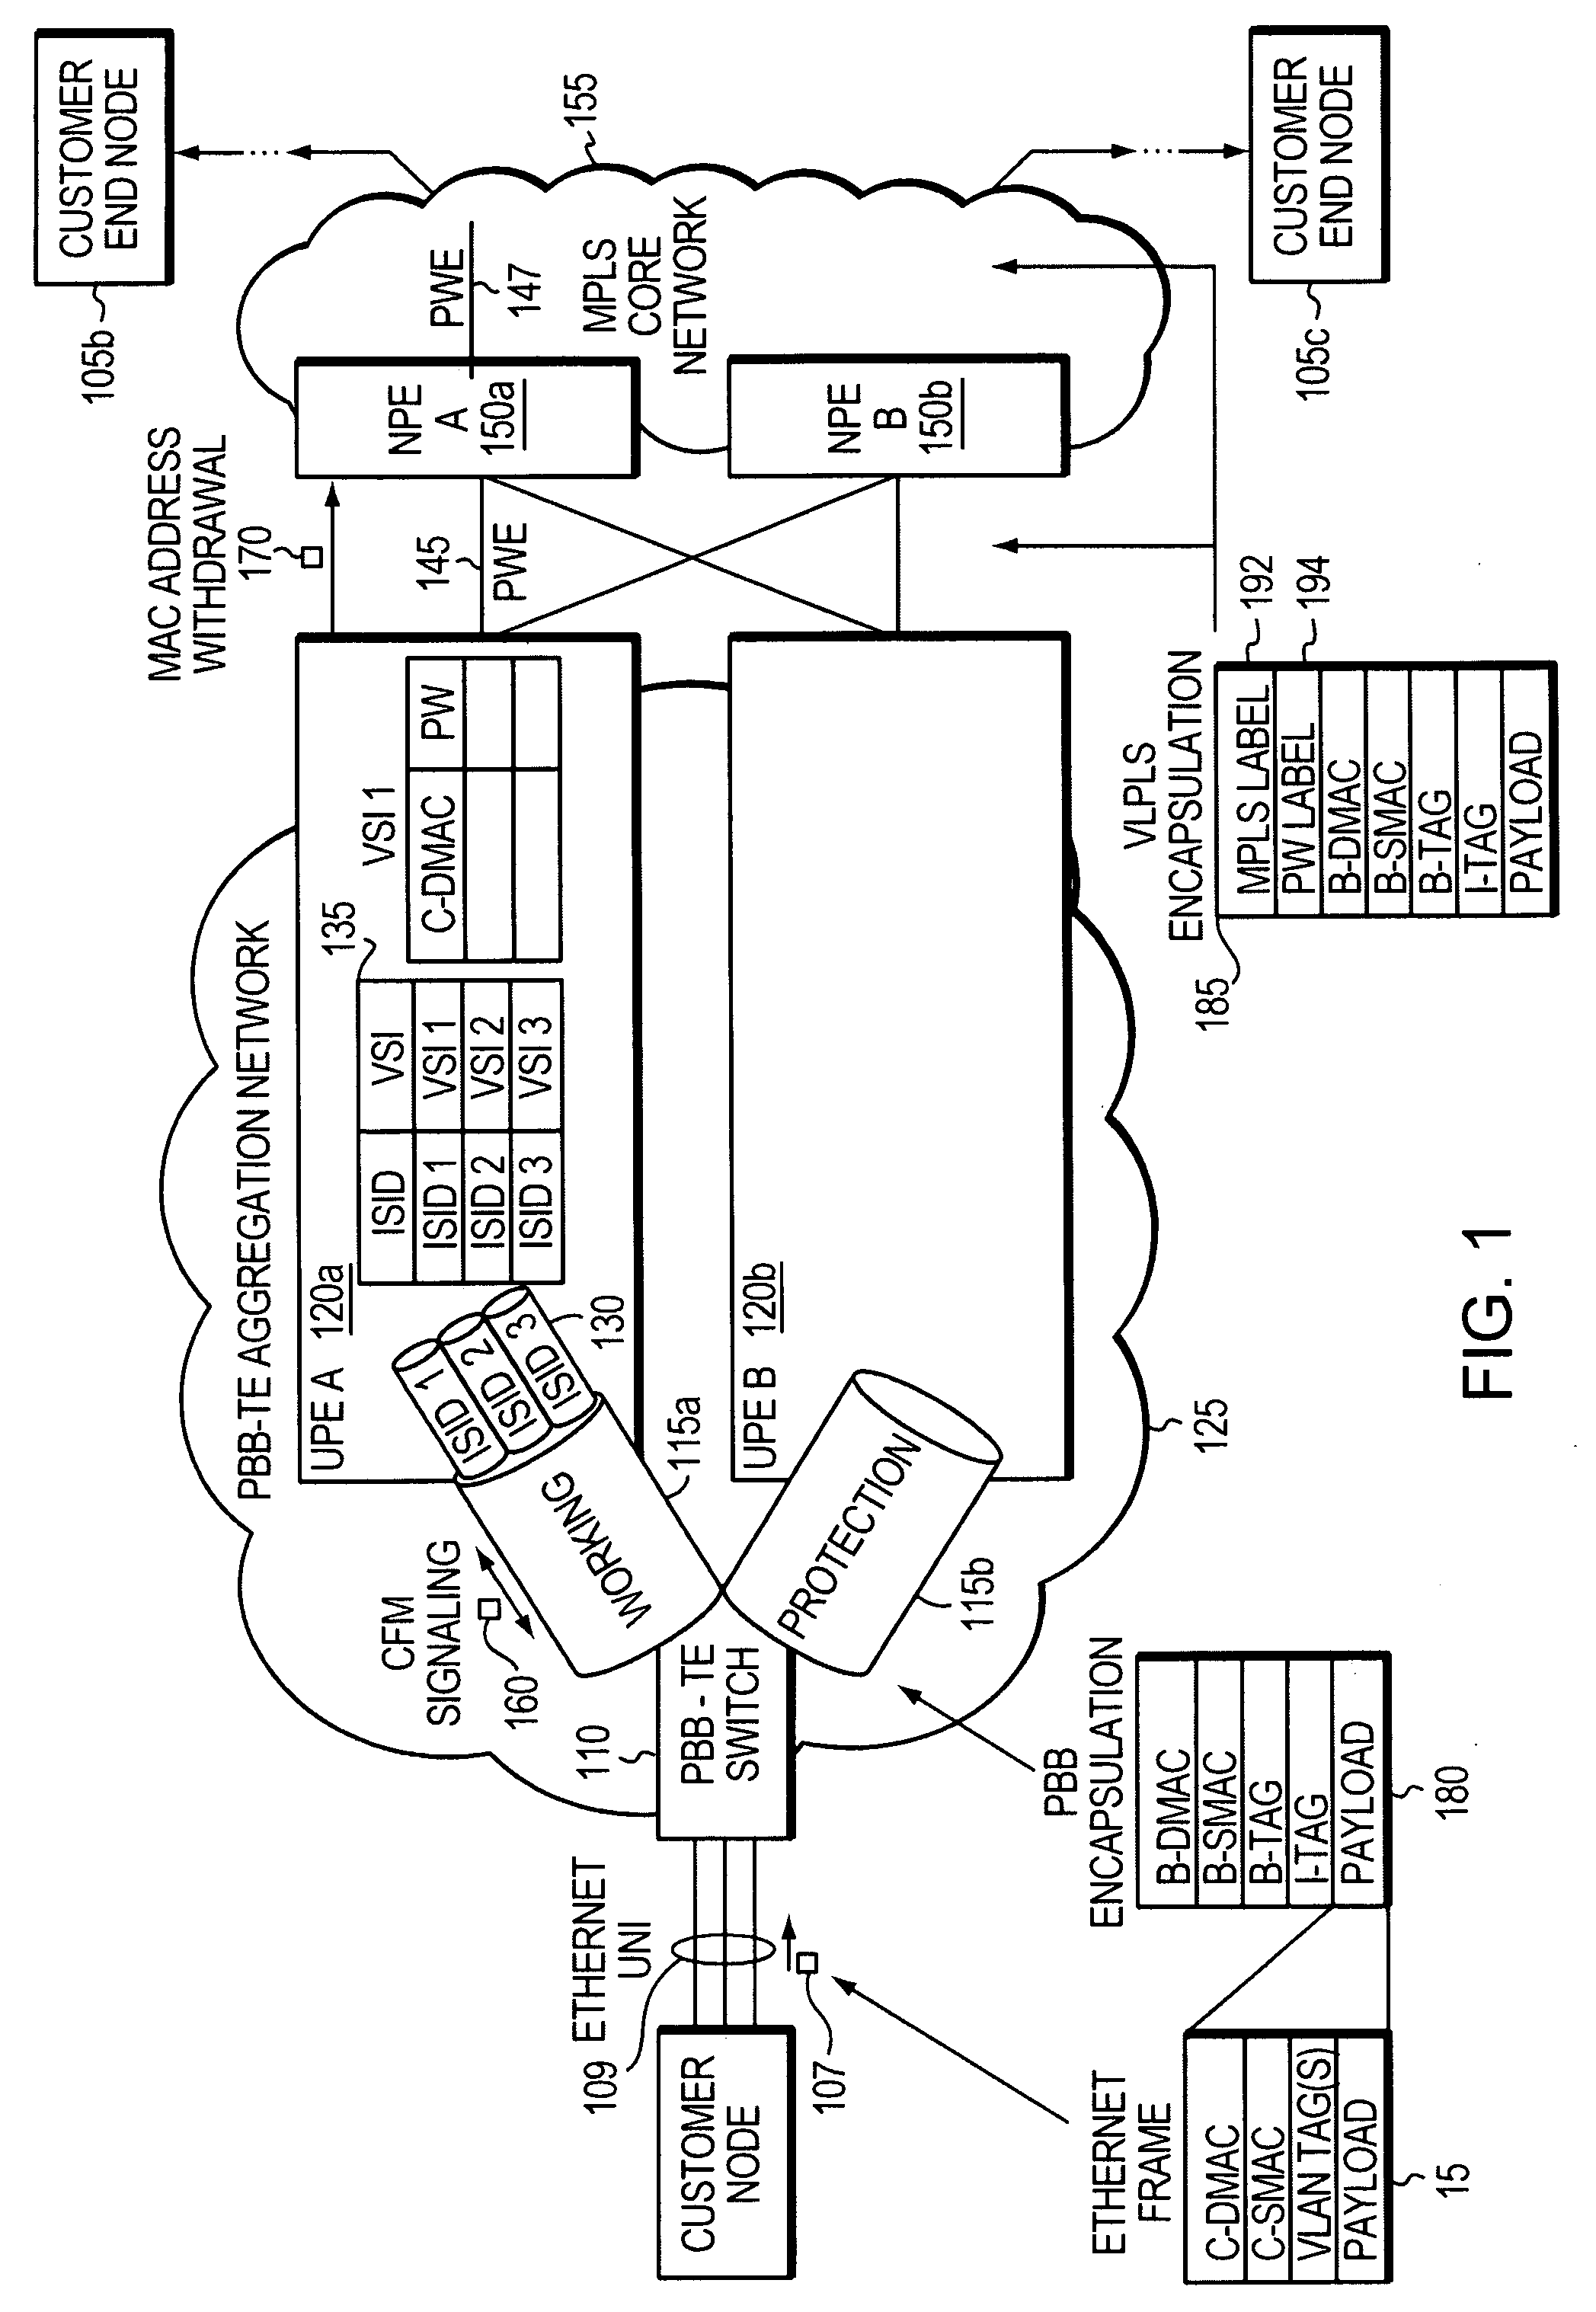 Method and apparatus for supporting network communications using point-to-point and point-to-multipoint protocols